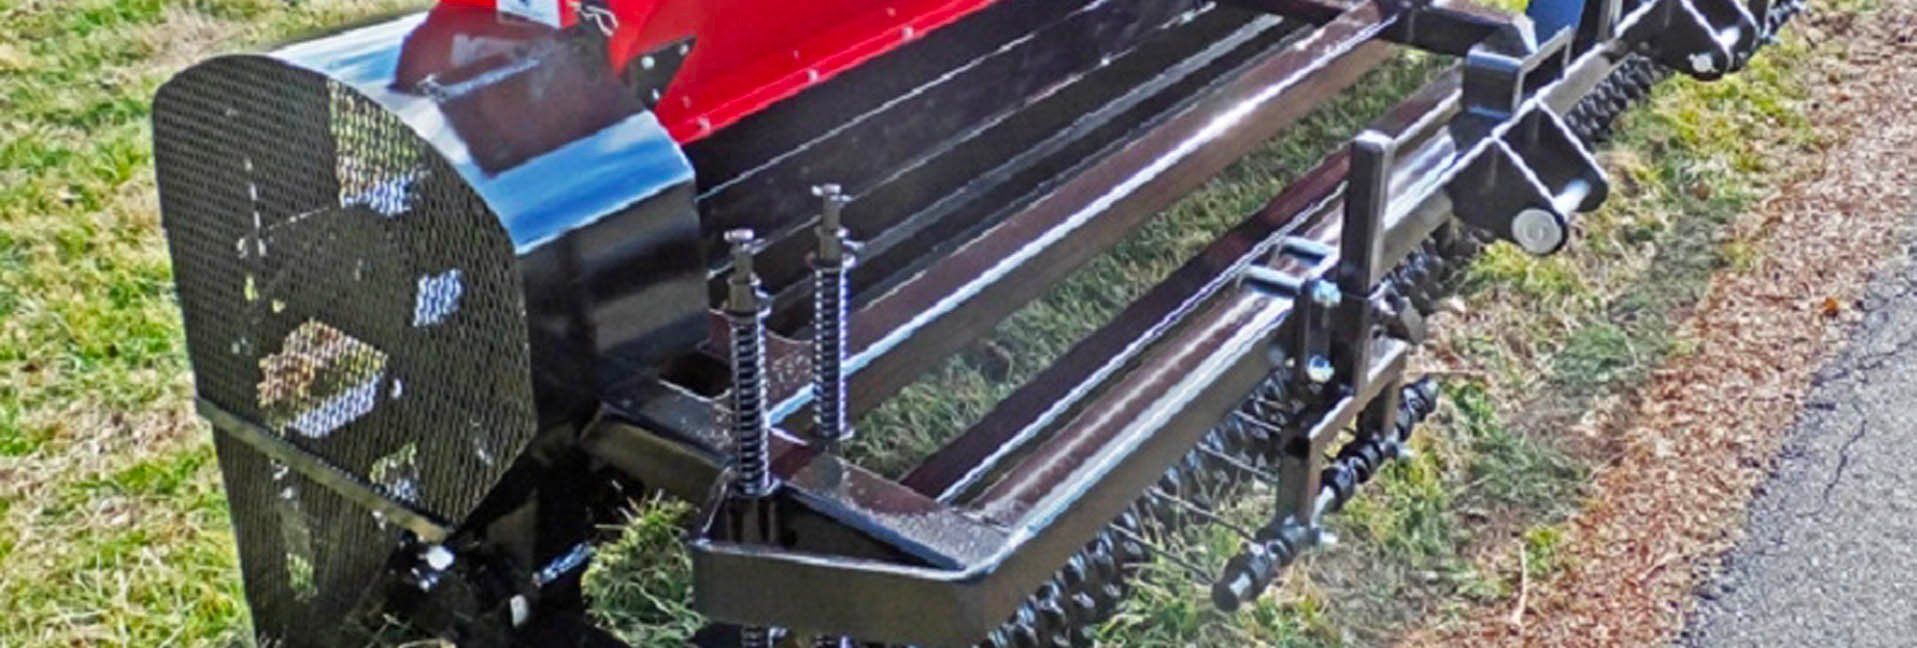 High Capacity Agricultural Seeders From Kasco